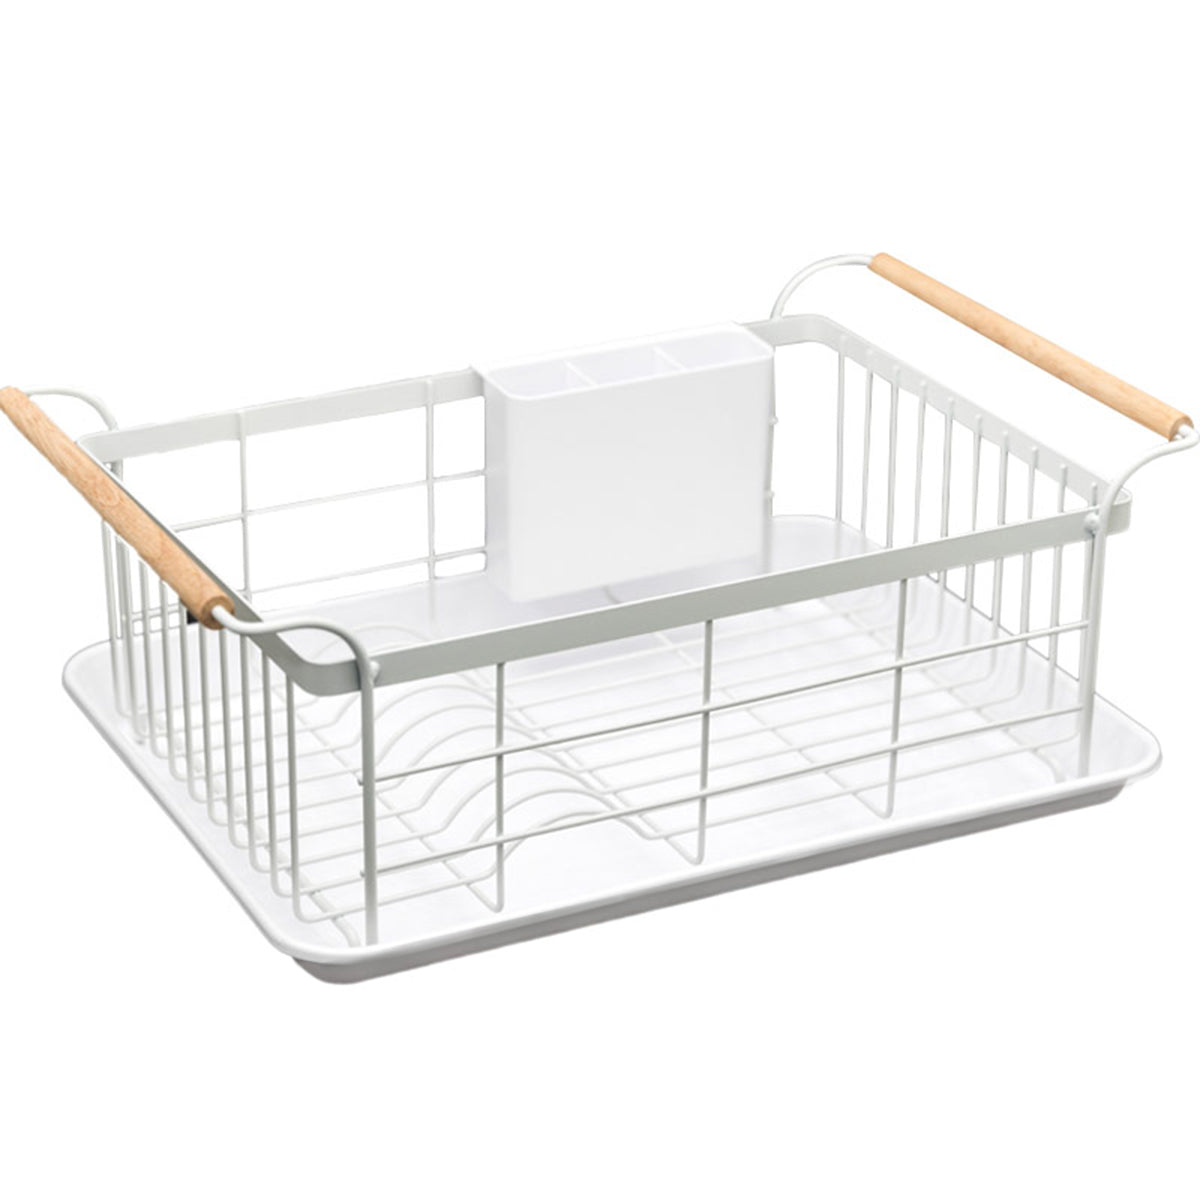 Large Stainless Steel Dish Rack (White)